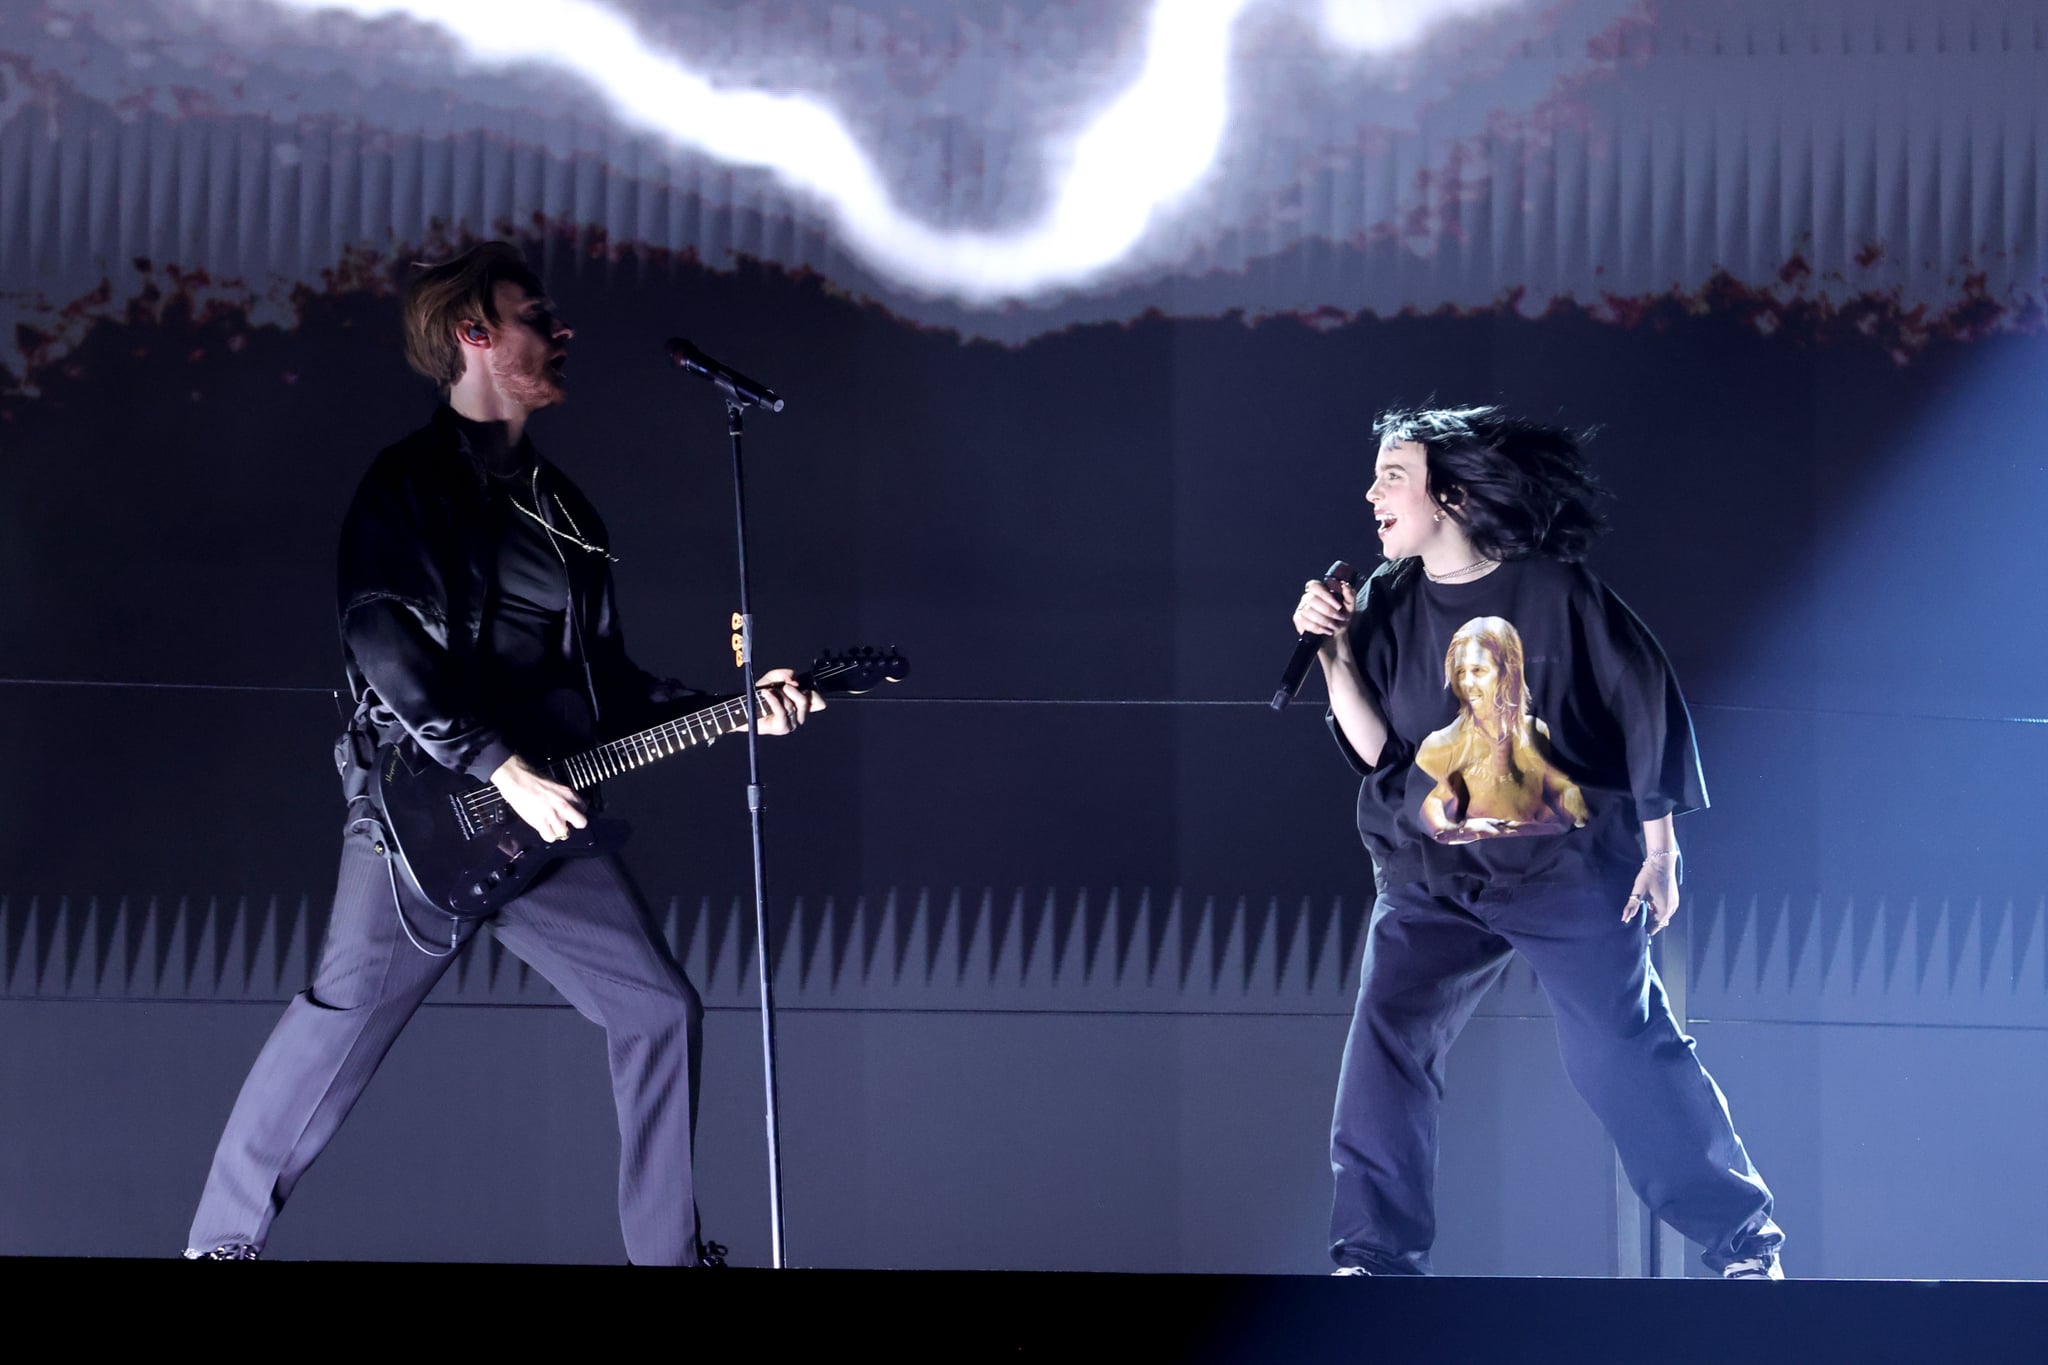 LAS VEGAS, NEVADA - APRIL 03: (L-R) FINNEAS and Billie Eilish perform onstage during the 64th Annual GRAMMY Awards at MGM Grand Garden Arena on April 03, 2022 in Las Vegas, Nevada. (Photo by Matt Winkelmeyer/Getty Images)